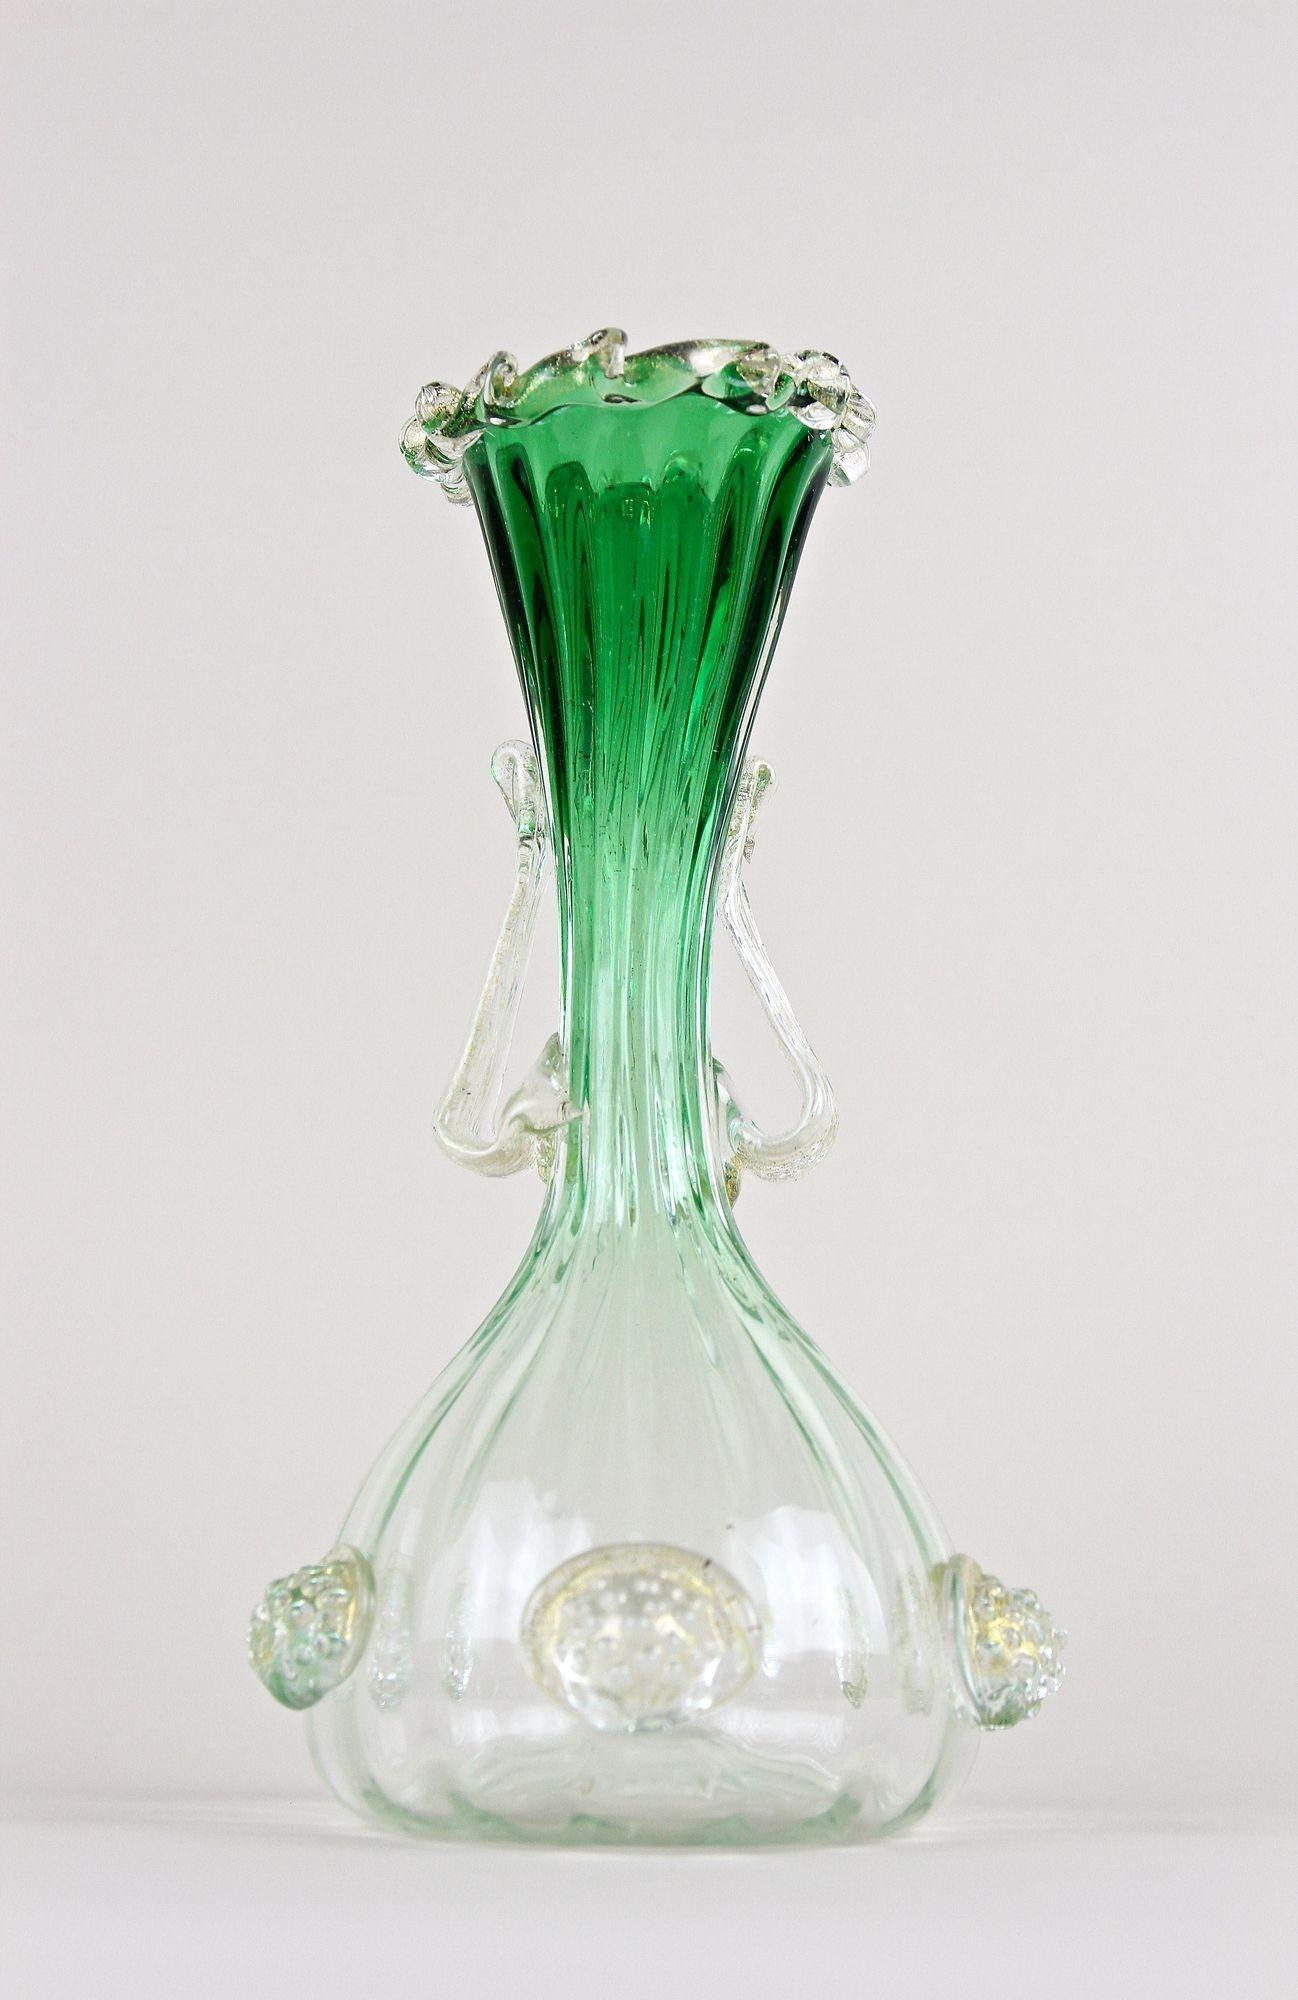 Green/ White Murano Glass Vase With 24k Gold Flakes by Fratelli Toso, IT ca 1930 For Sale 9